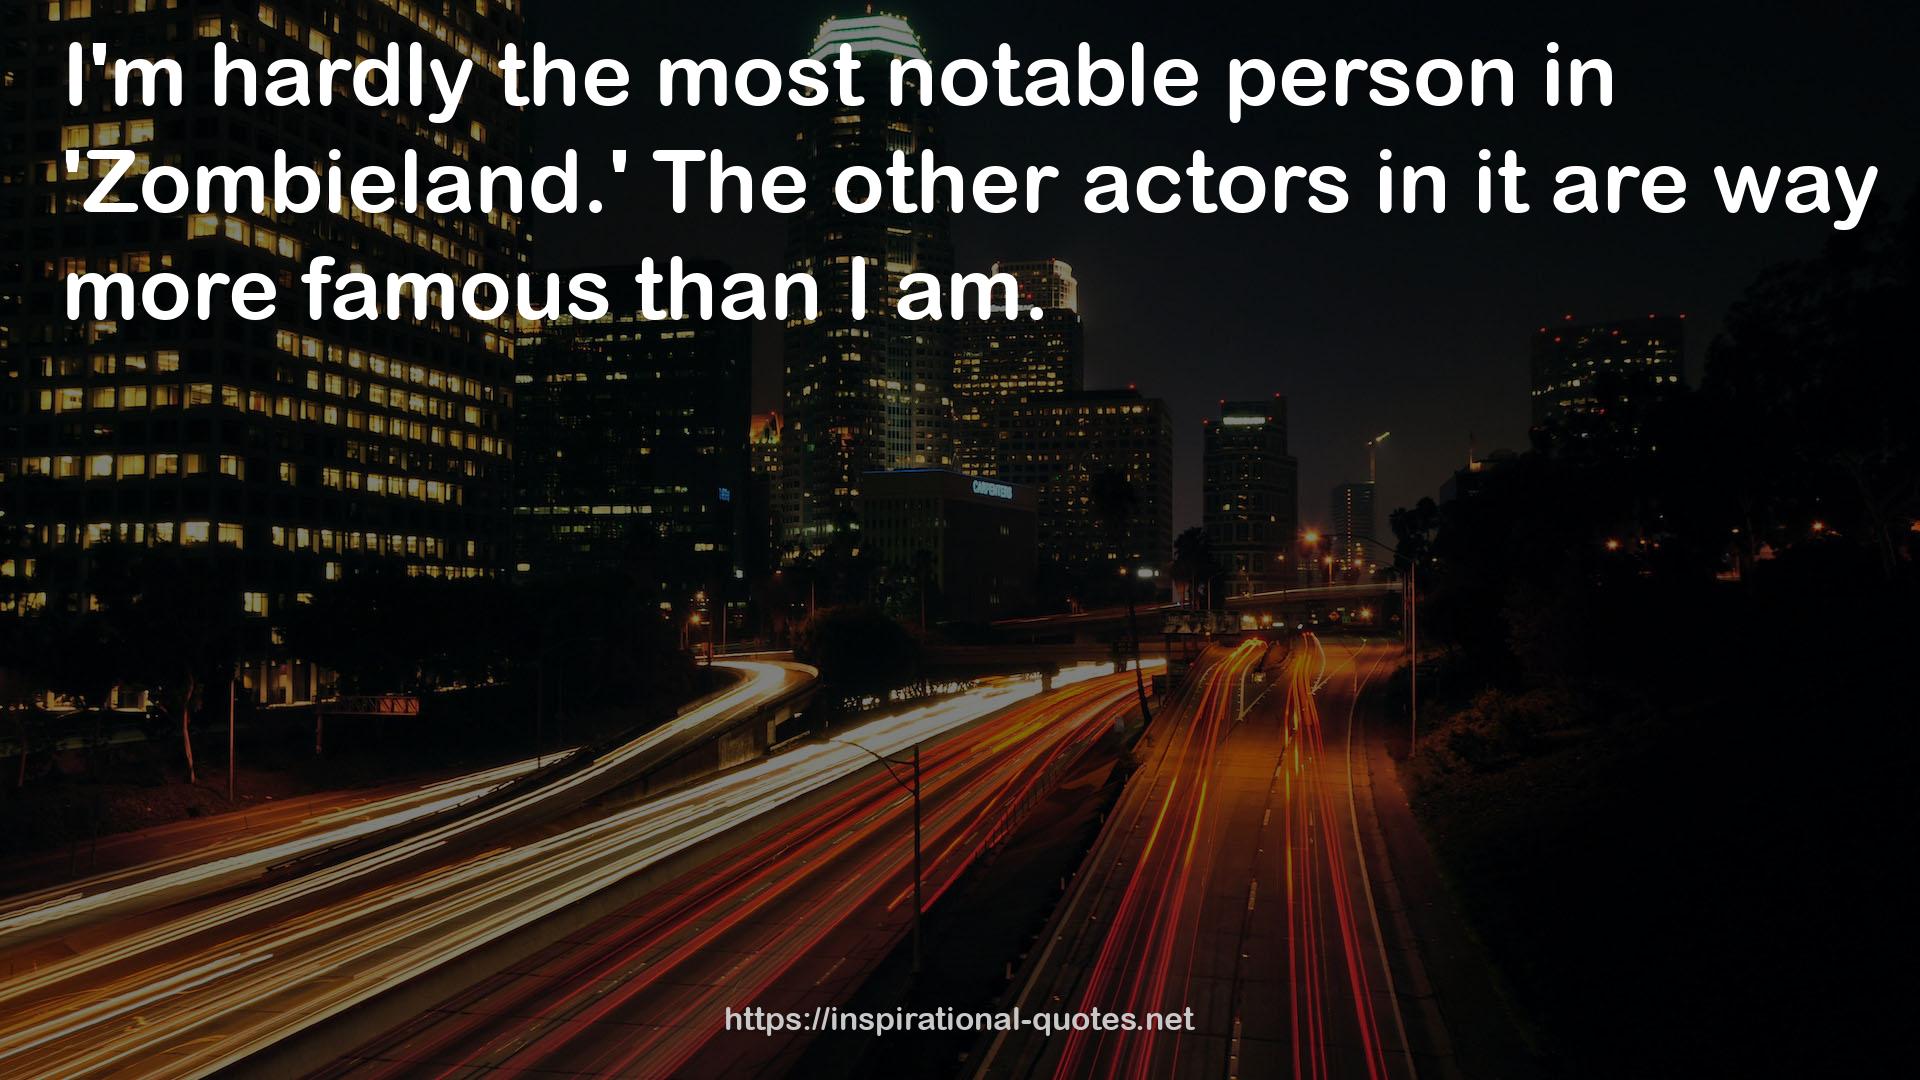 The other actors  QUOTES